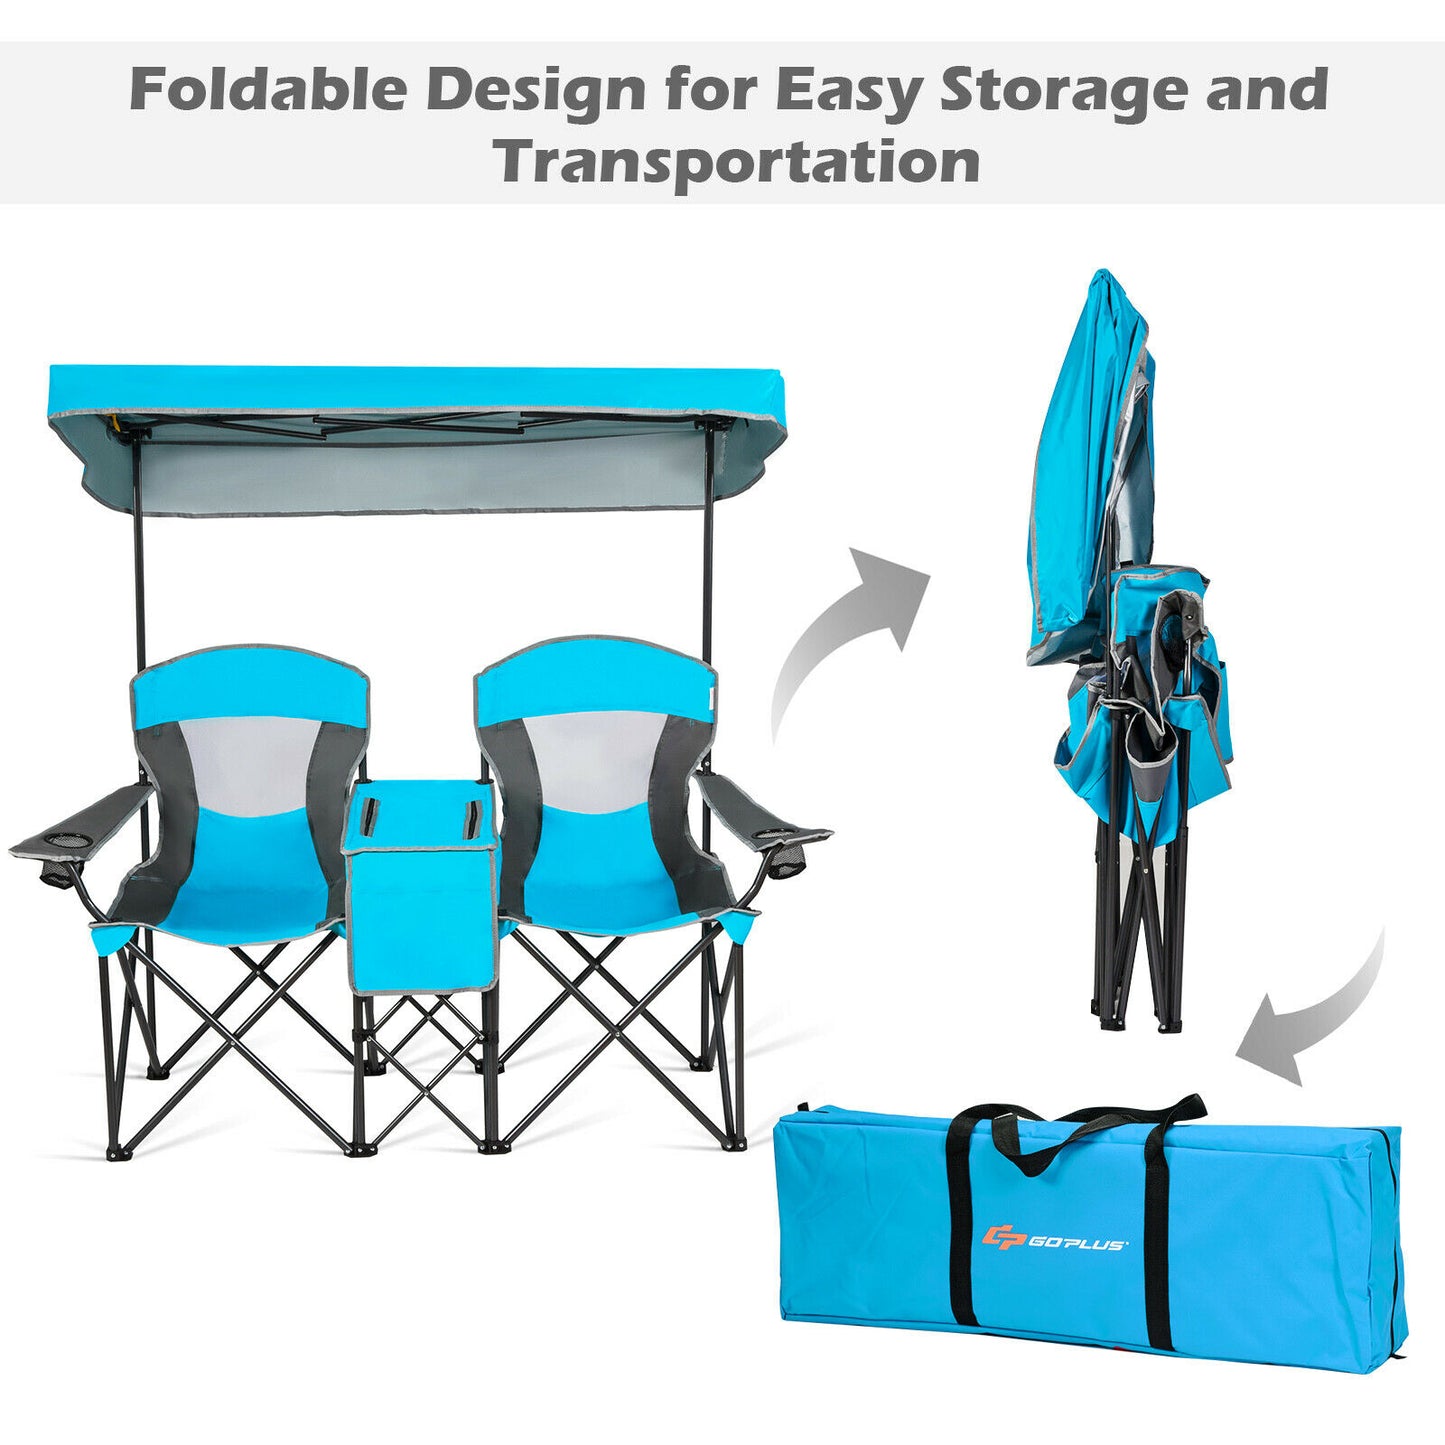 Portable Folding Camping Chair with Canopy and Cup Holder